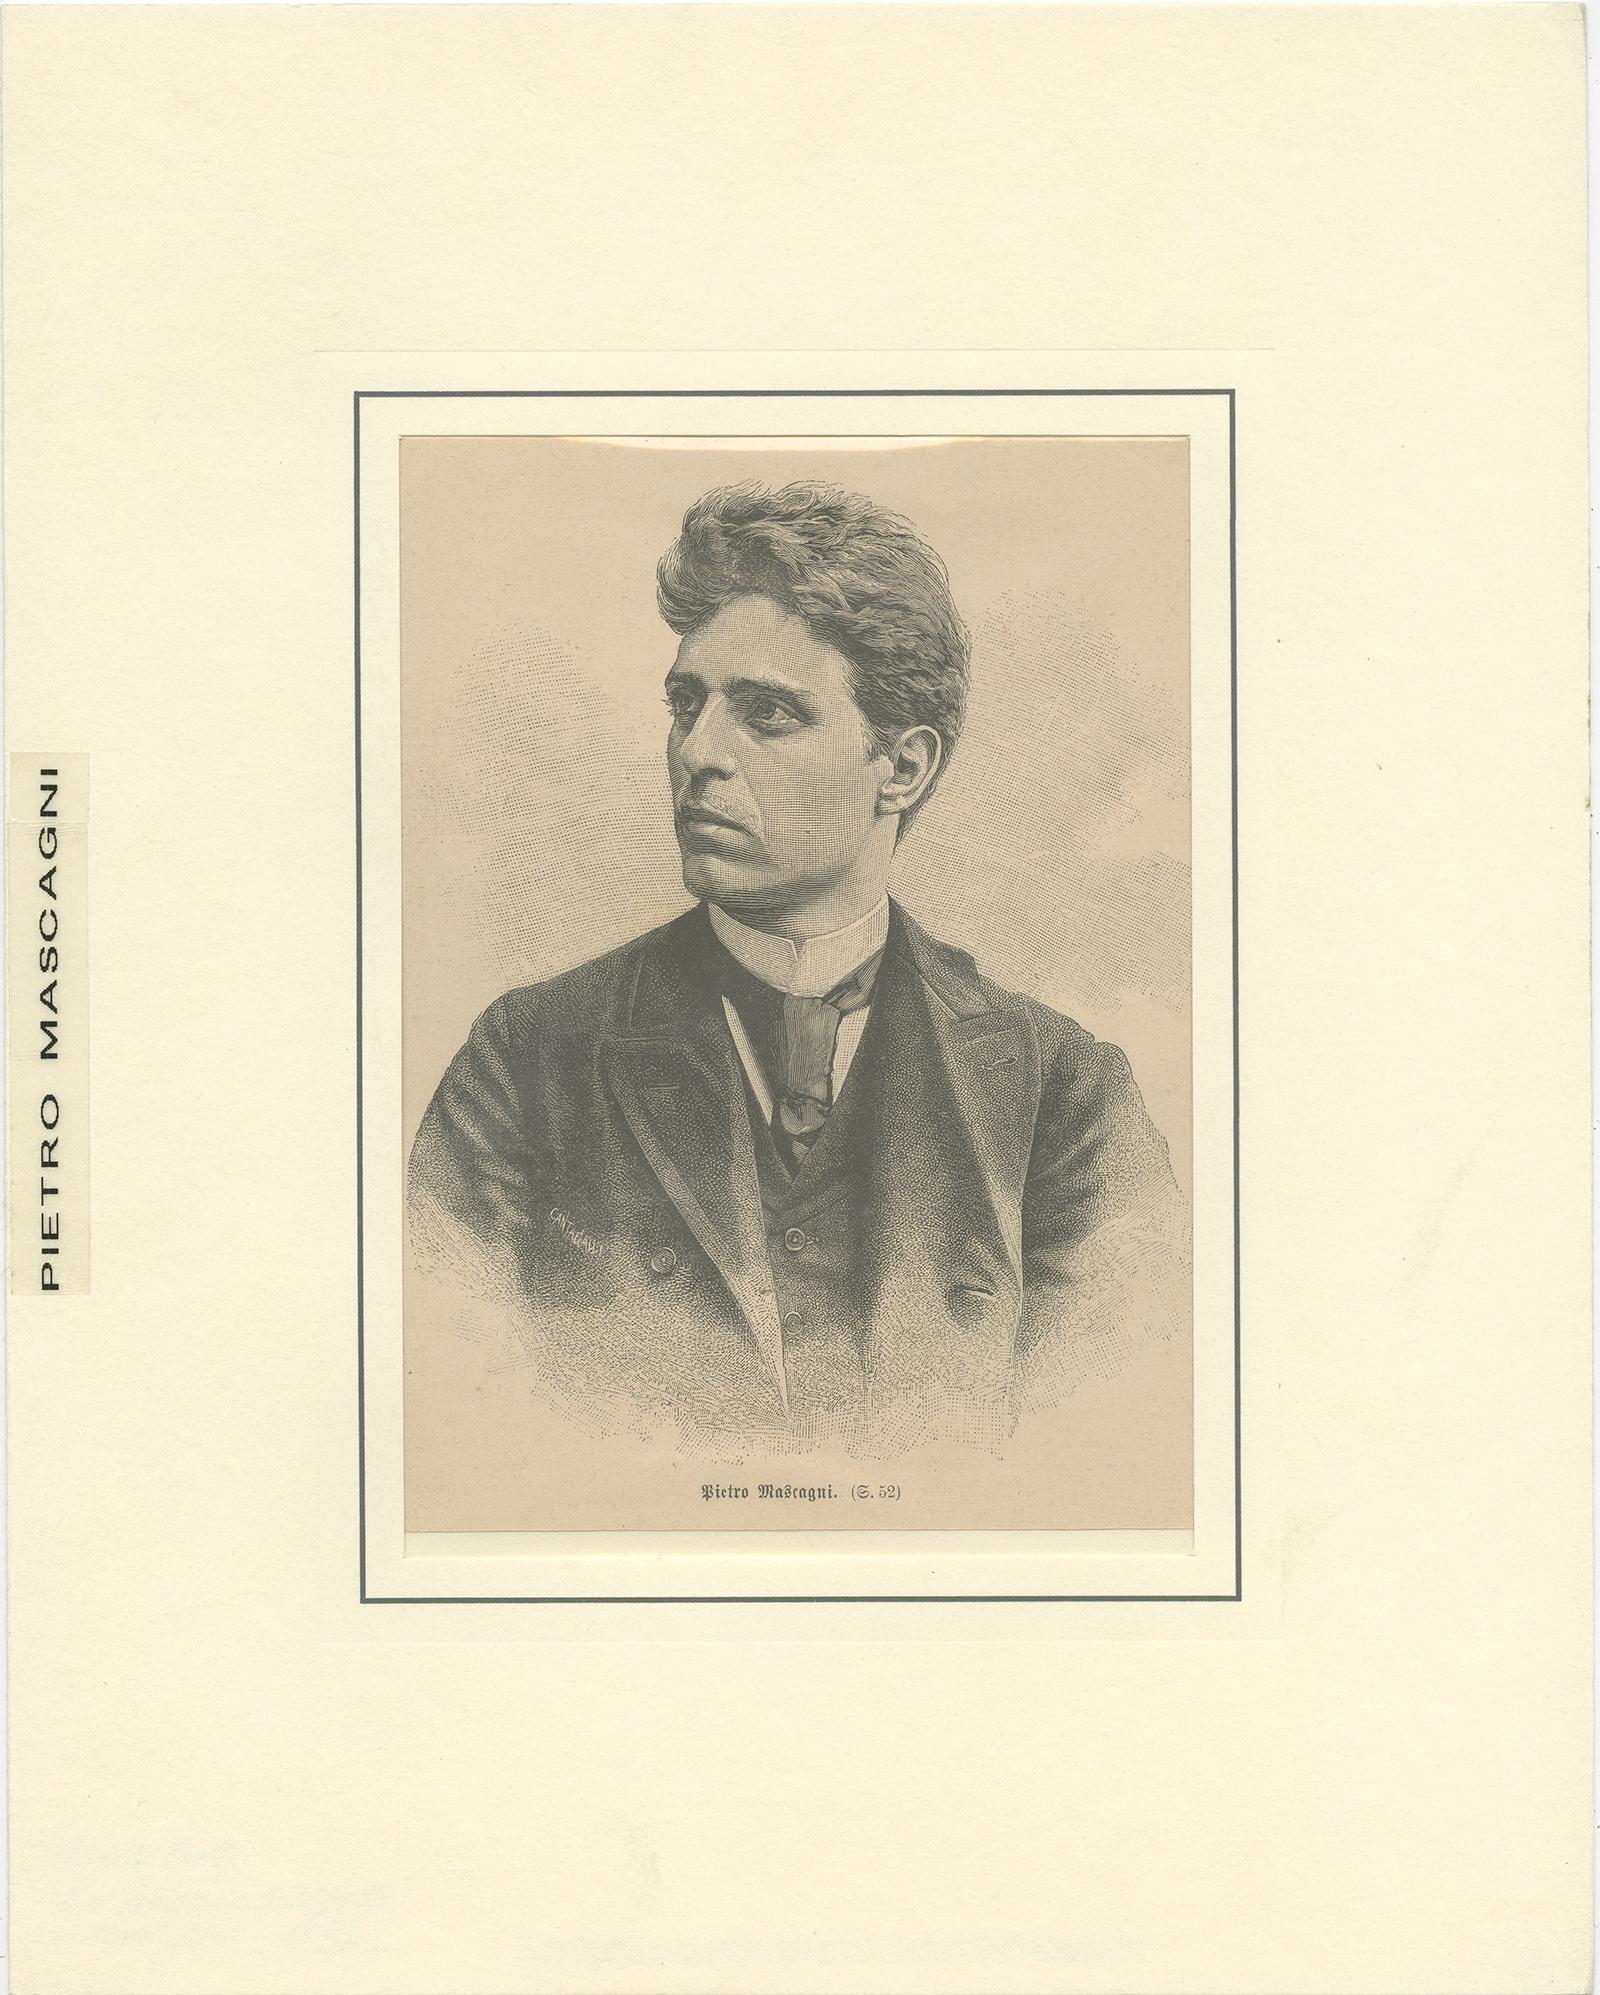 Antique print titled 'Pietro Mascagni'. 

Portrait of Pietro Mascagni. Pietro Mascagni (7 December 1863 – 2 August 1945) was an Italian composer primarily known for his operas.

Artists and Engravers: Anonymous.
Condition: Good, age-related